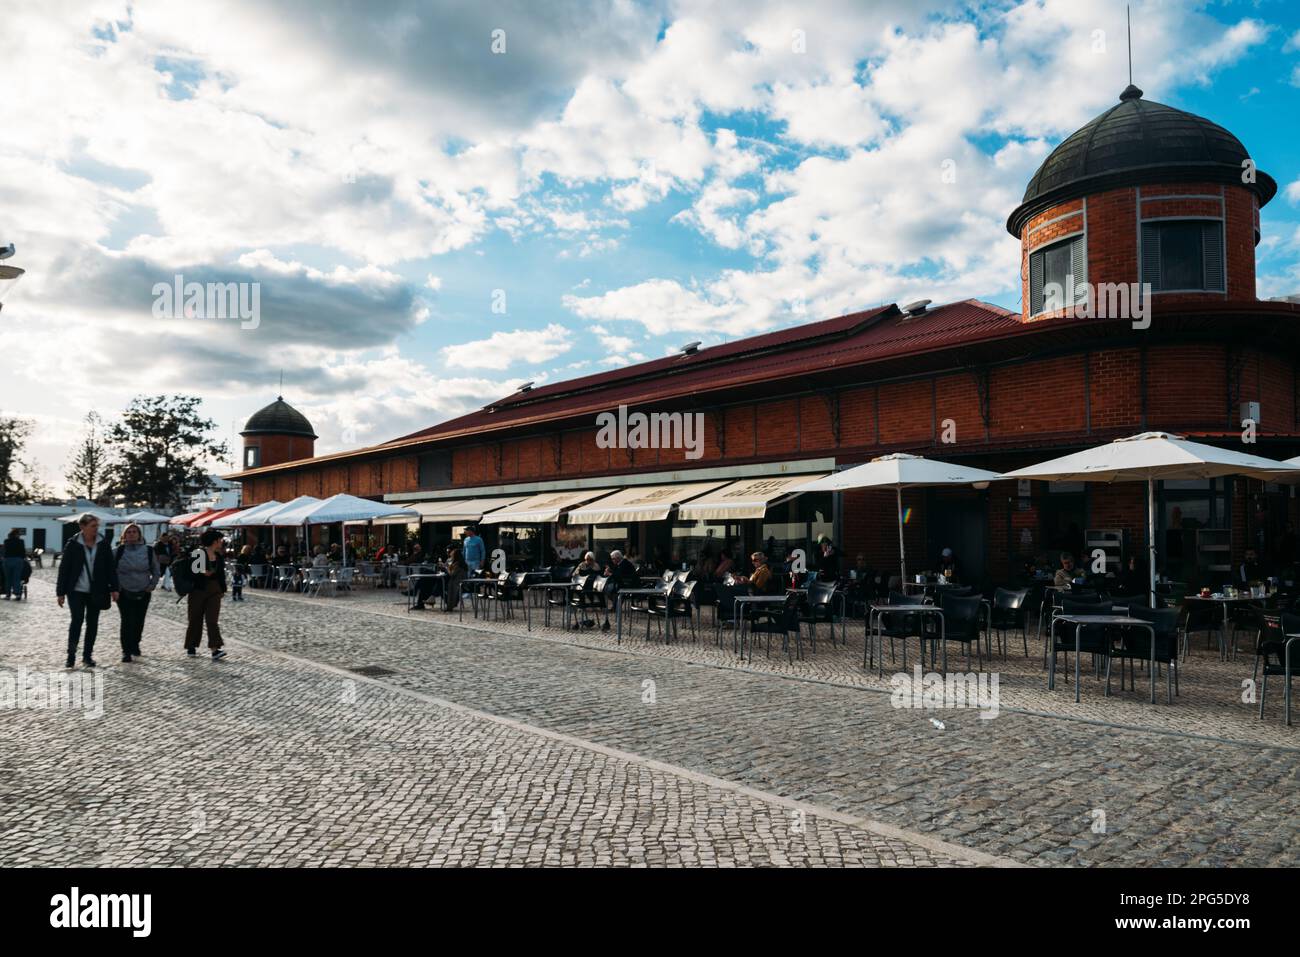 Olhao, Algarve, Portugal - March 18, 2023: Facade of the famous fish and produce market Olhao, East Algarve with tourists strolling by Stock Photo